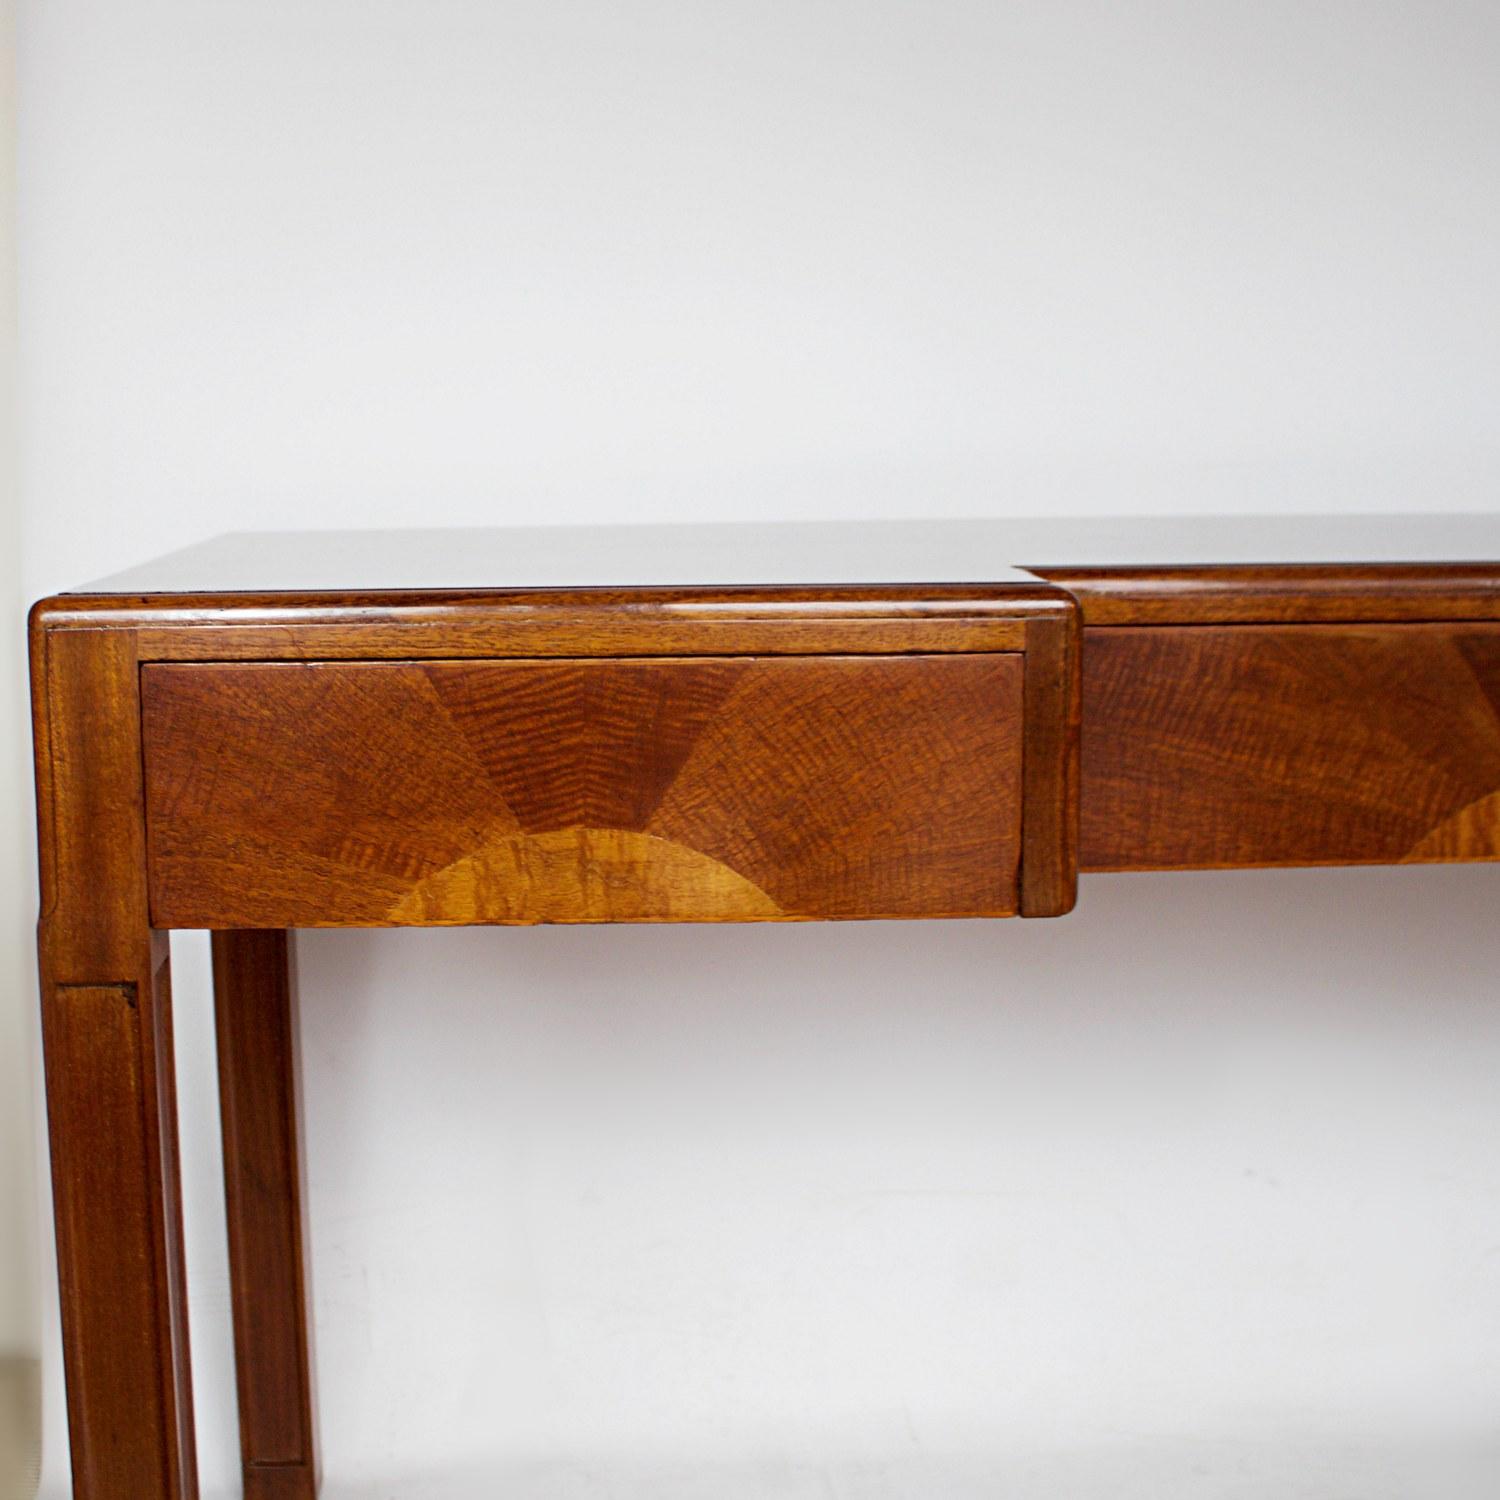 Mahogany Art Deco Console Table/Sideboard by Betty Joel Signed and Dated 1929